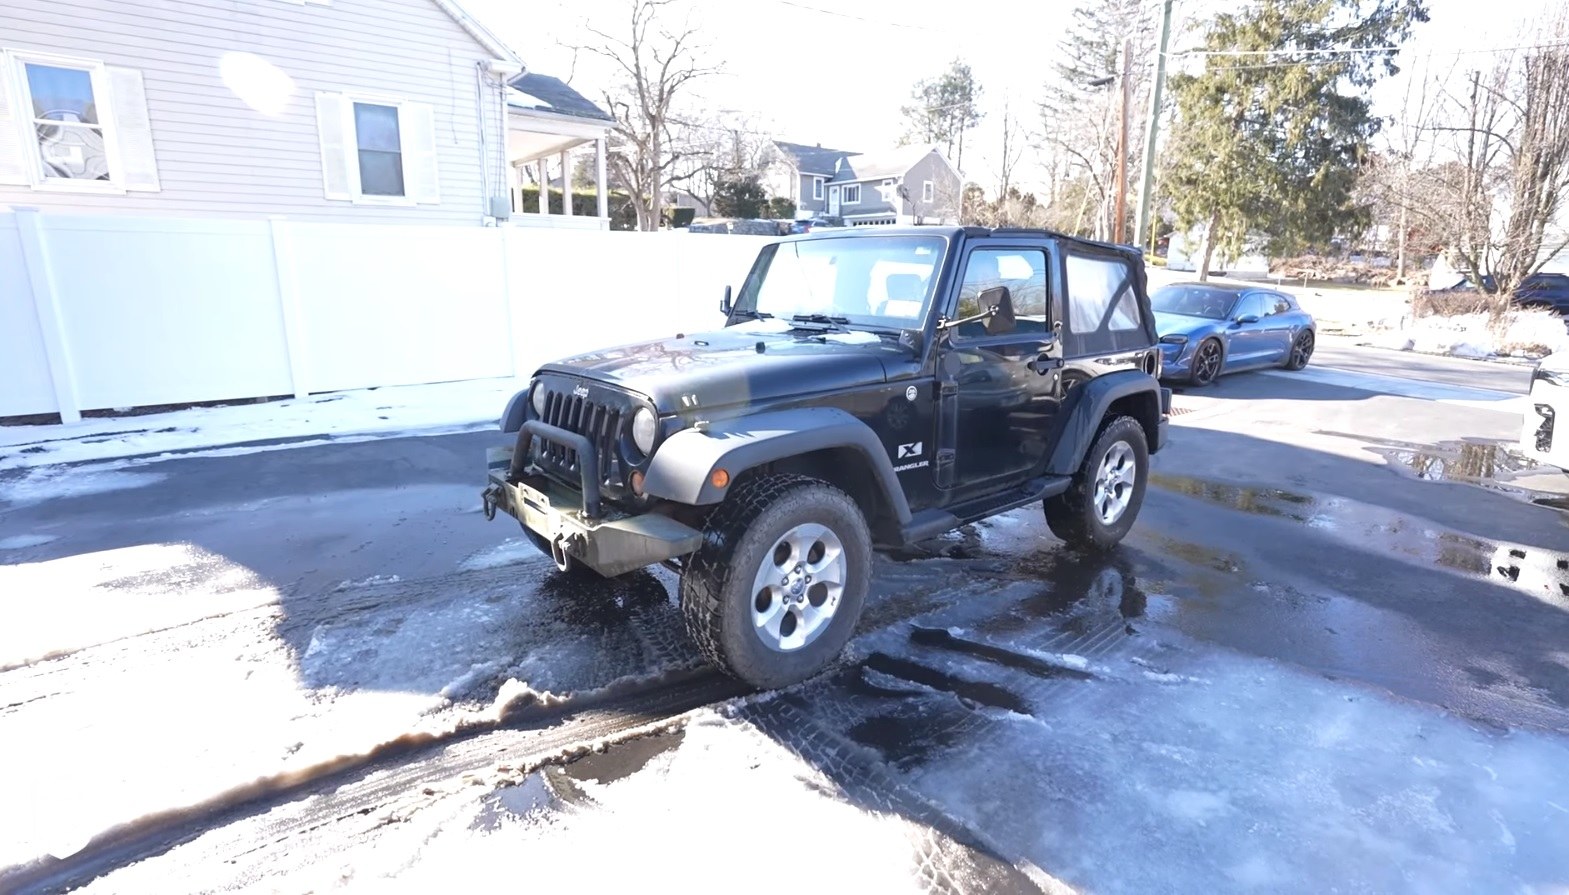 2008 Jeep Wrangler Gets First Wash After Five Years, It's a Disaster Detail  - autoevolution